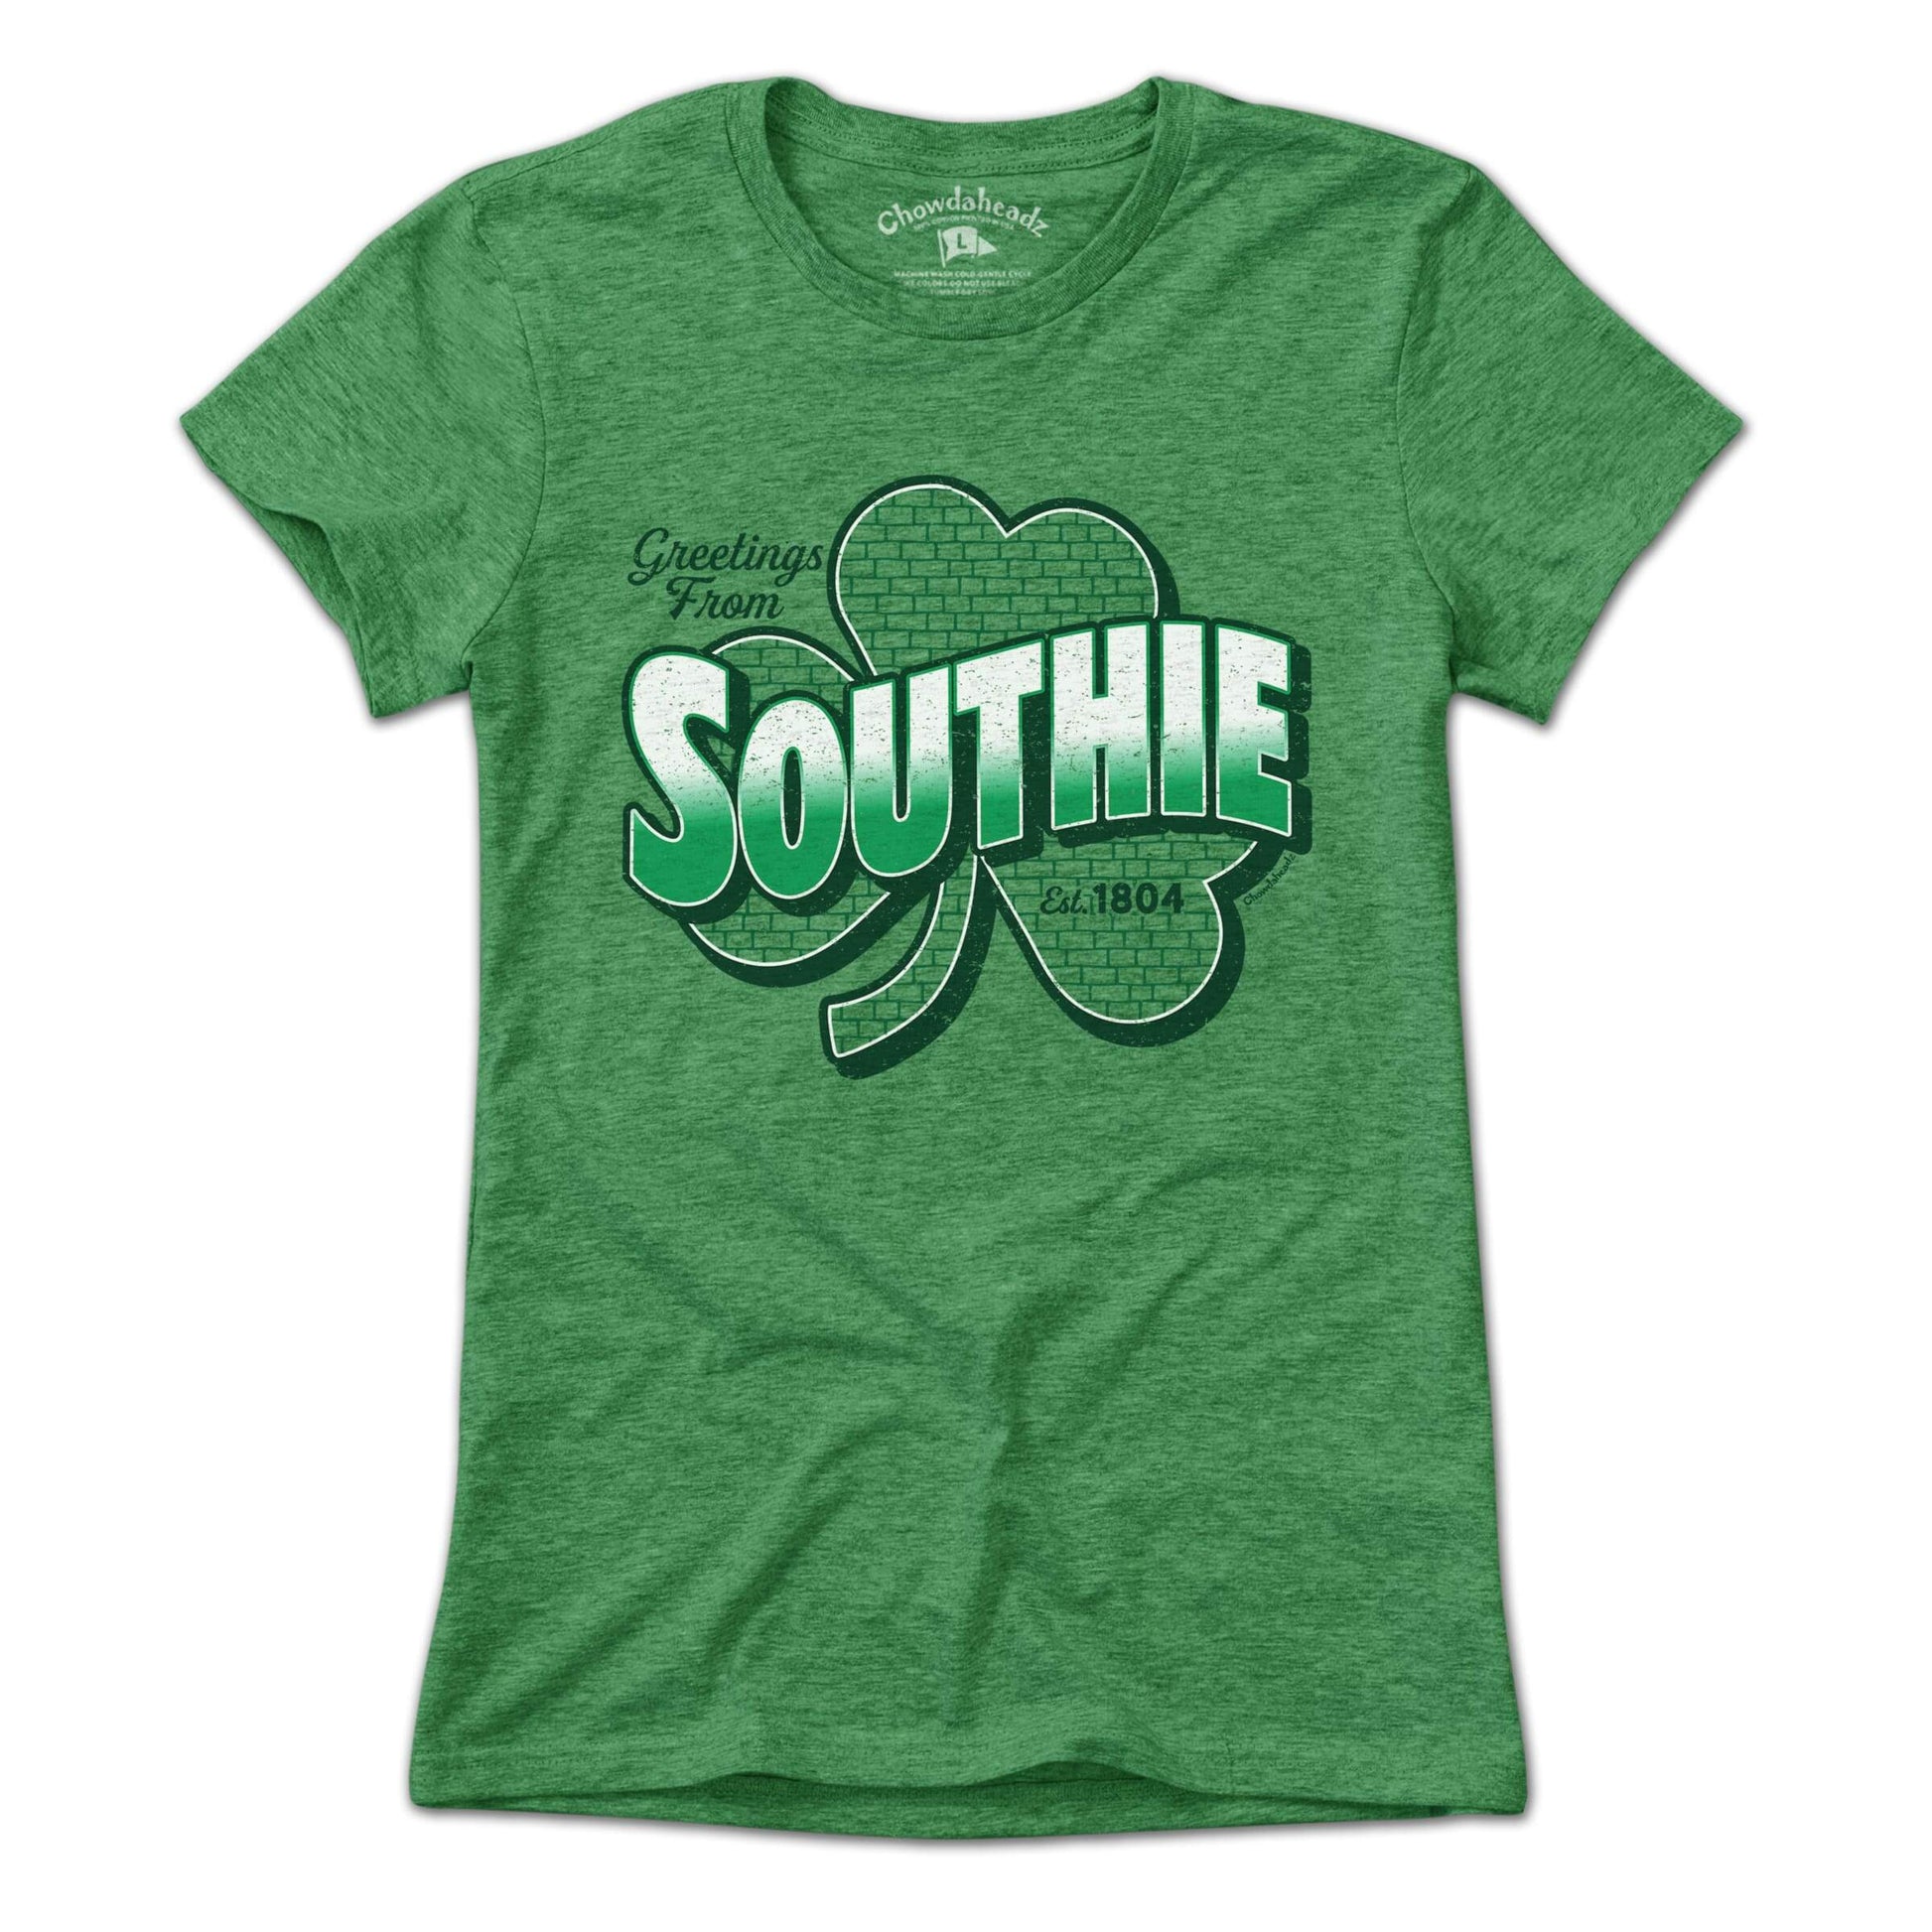 Greetings From Southie T-Shirt - Chowdaheadz